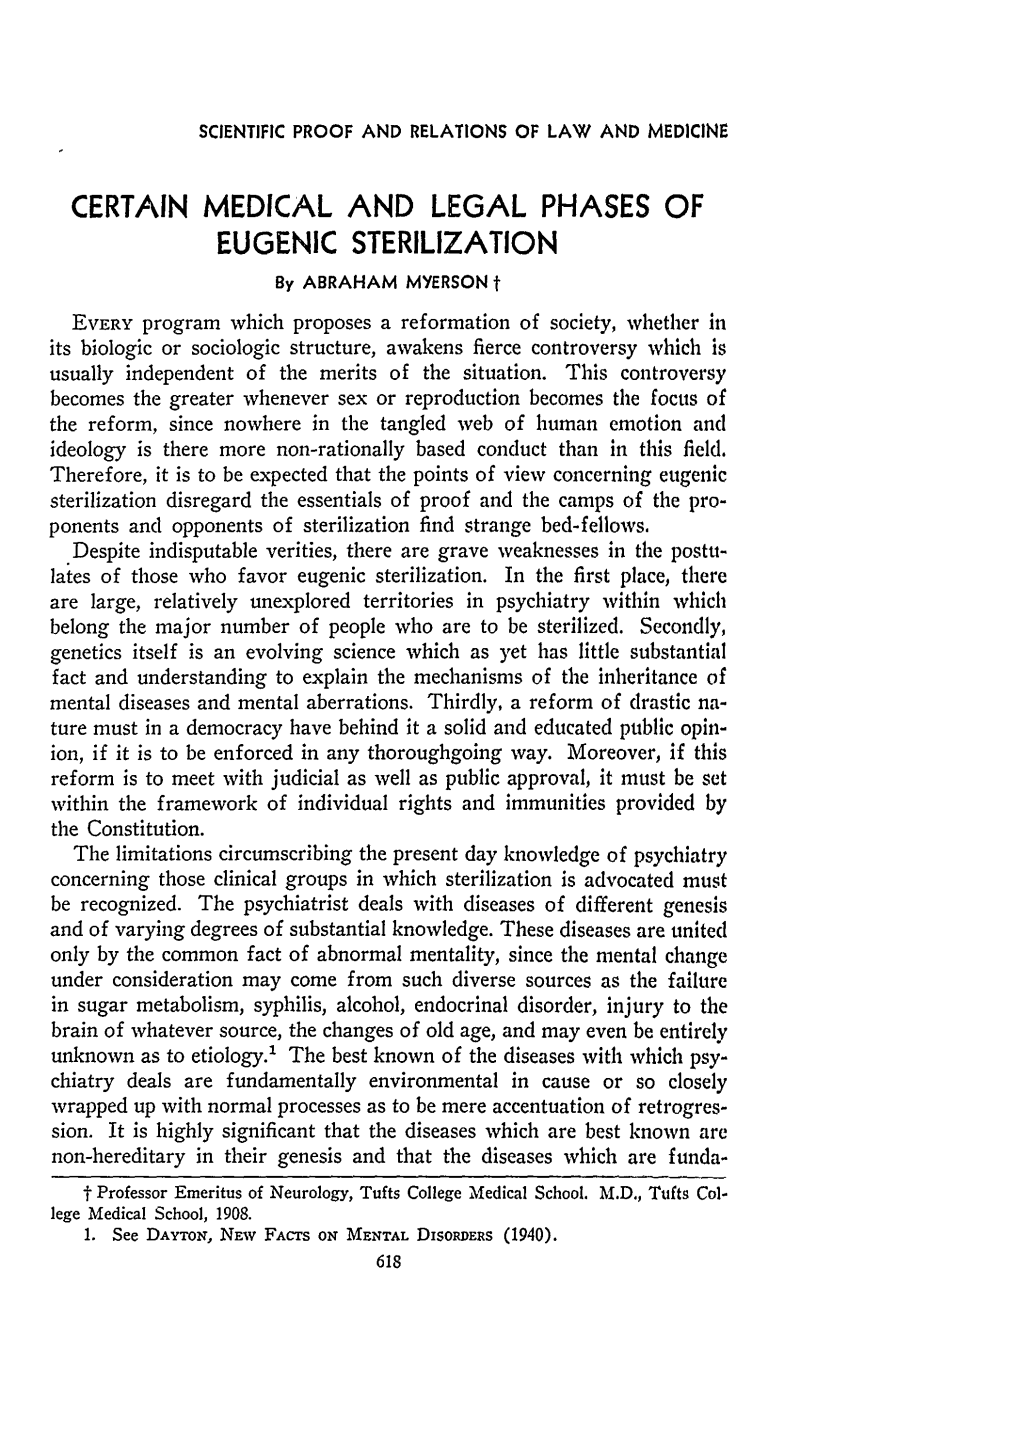 CERTAIN MEDICAL and LEGAL PHASES of EUGENIC STERILIZATION by ABRAHAM MYERSON T